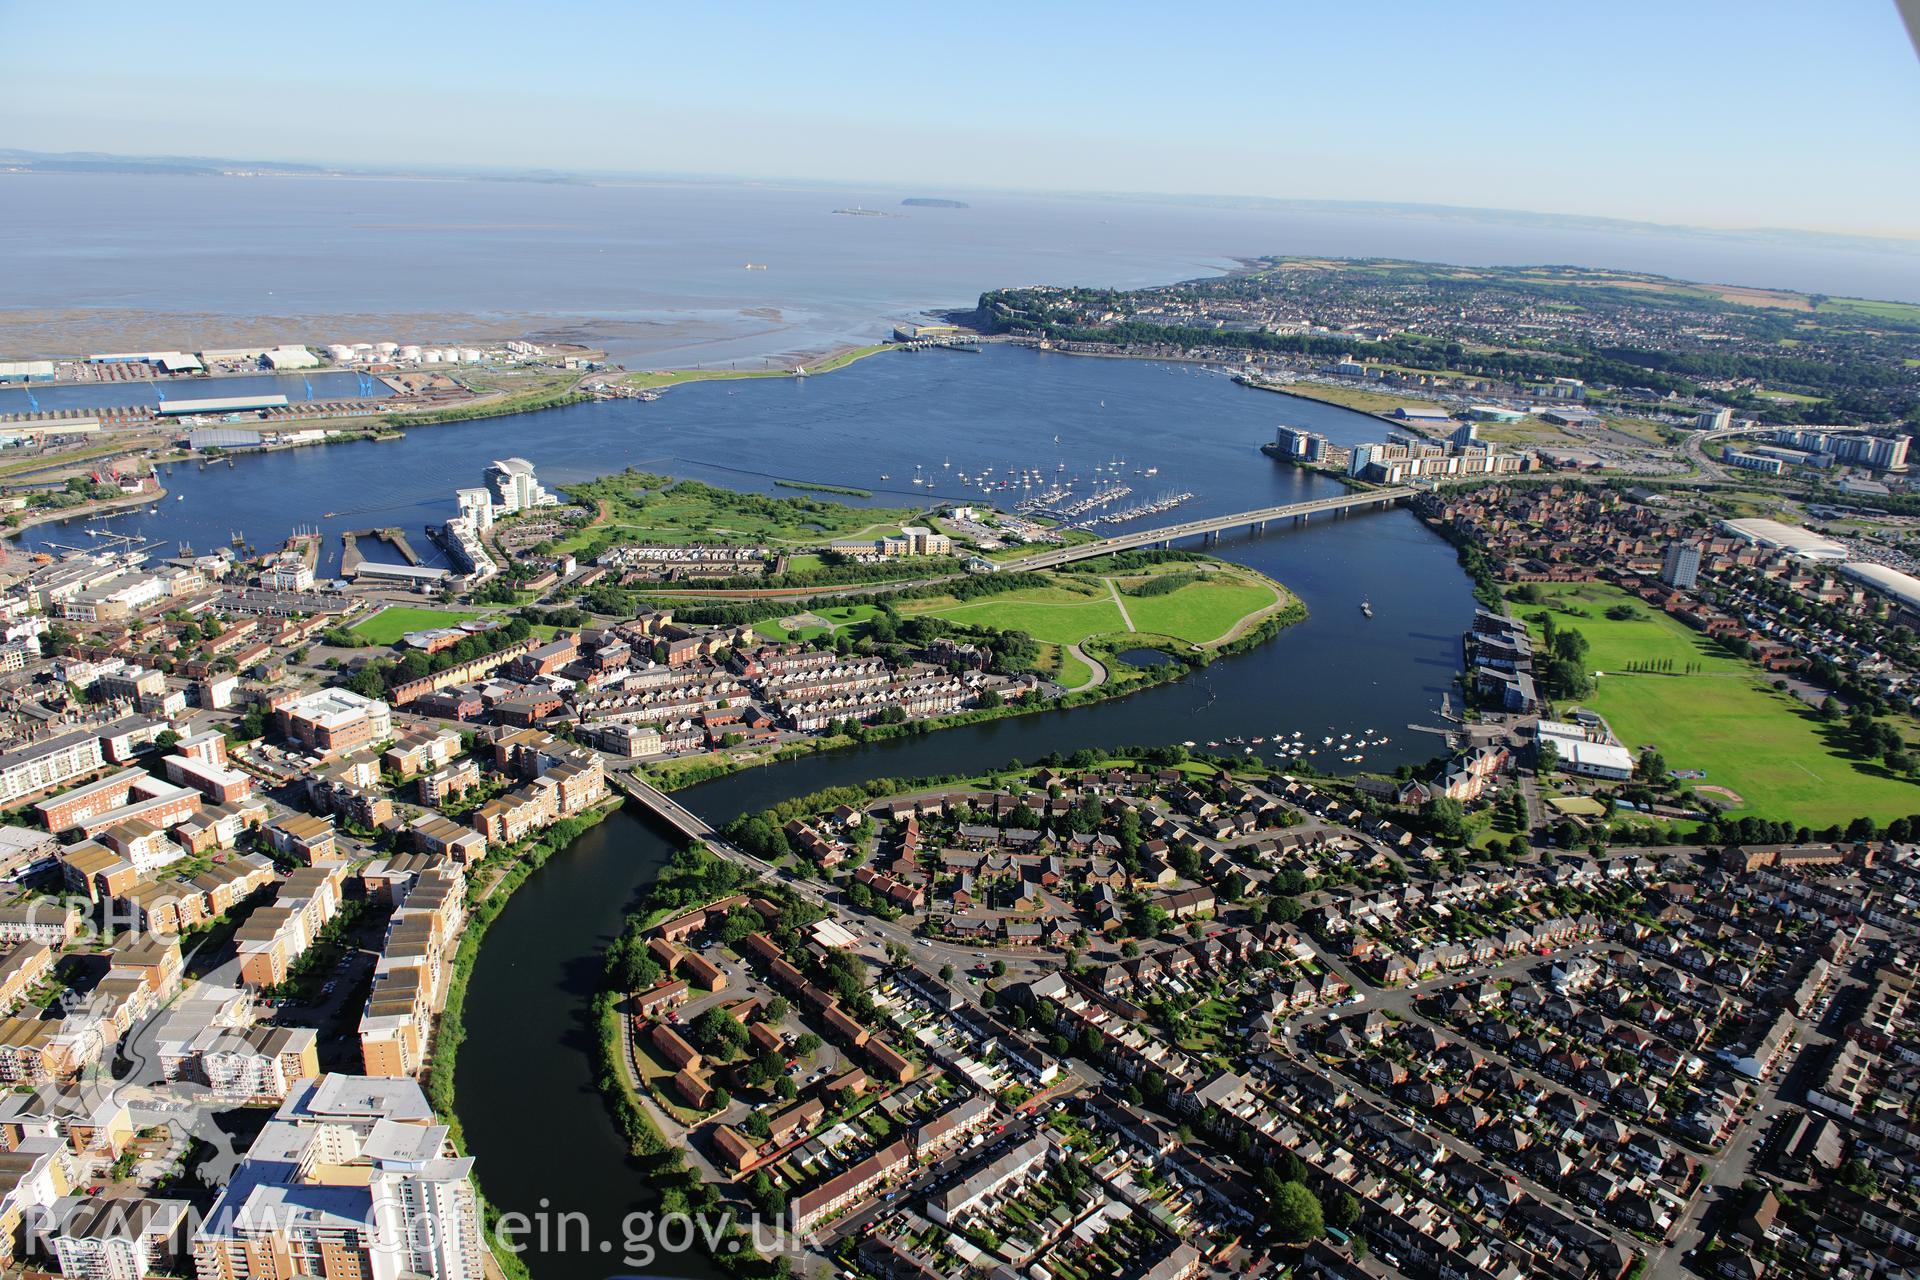 RCAHMW colour oblique photograph of Cardiff Bay, general view from north over Grangetown and Butetown. Taken by Toby Driver on 24/07/2012.